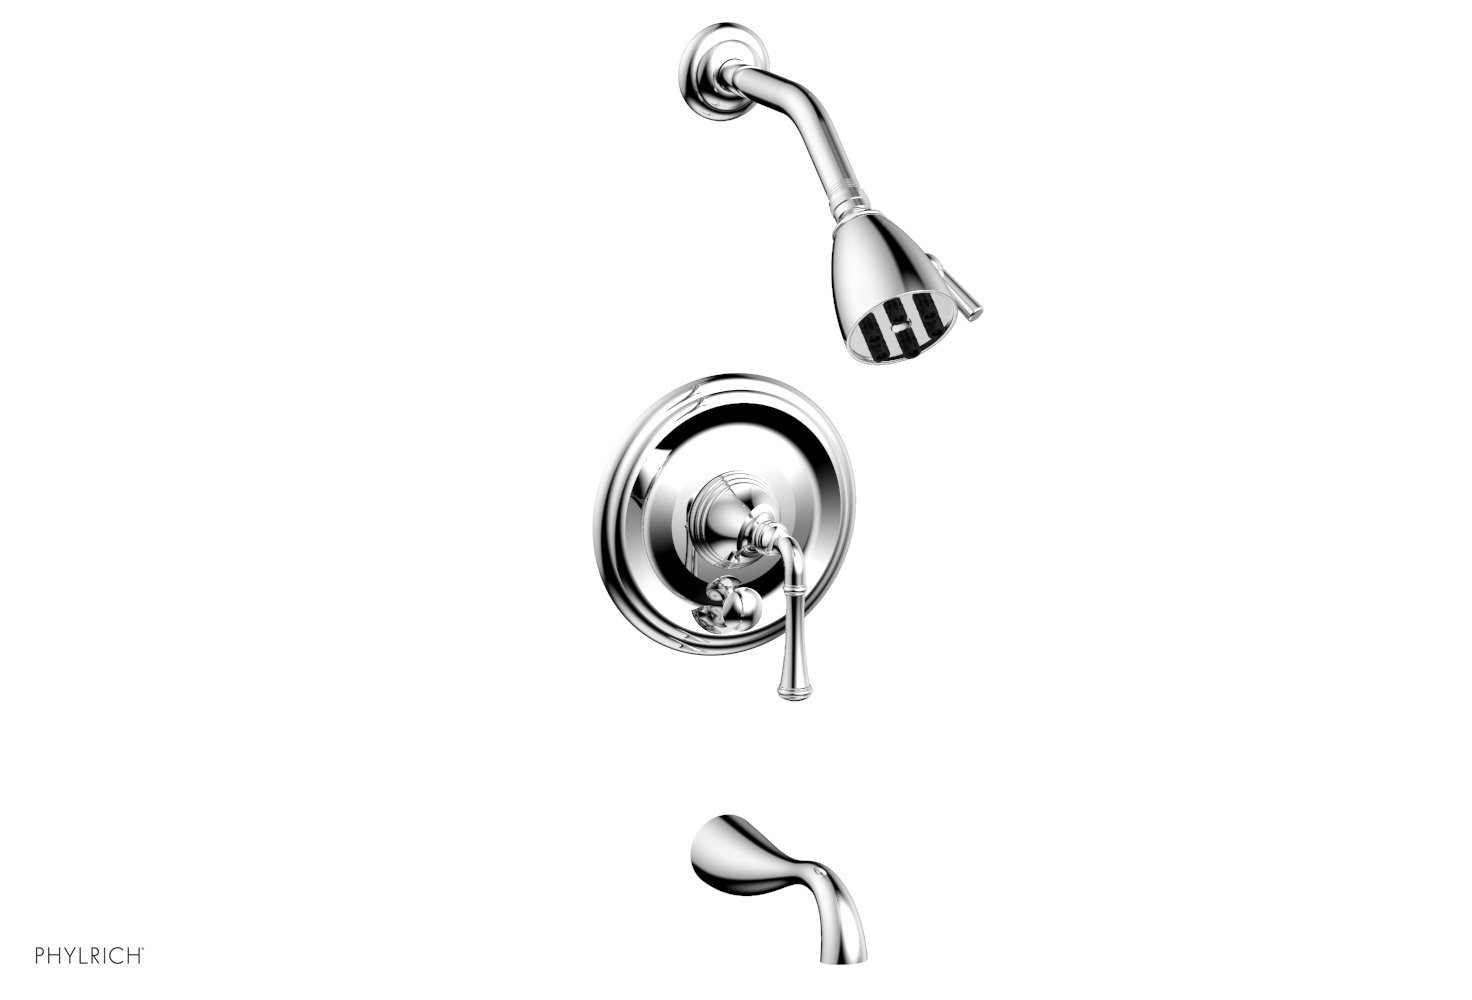 PHYLRICH DPB2205 3RING WALL MOUNT PRESSURE BALANCE TUB AND SHOWER SET WITH LEVER HANDLE